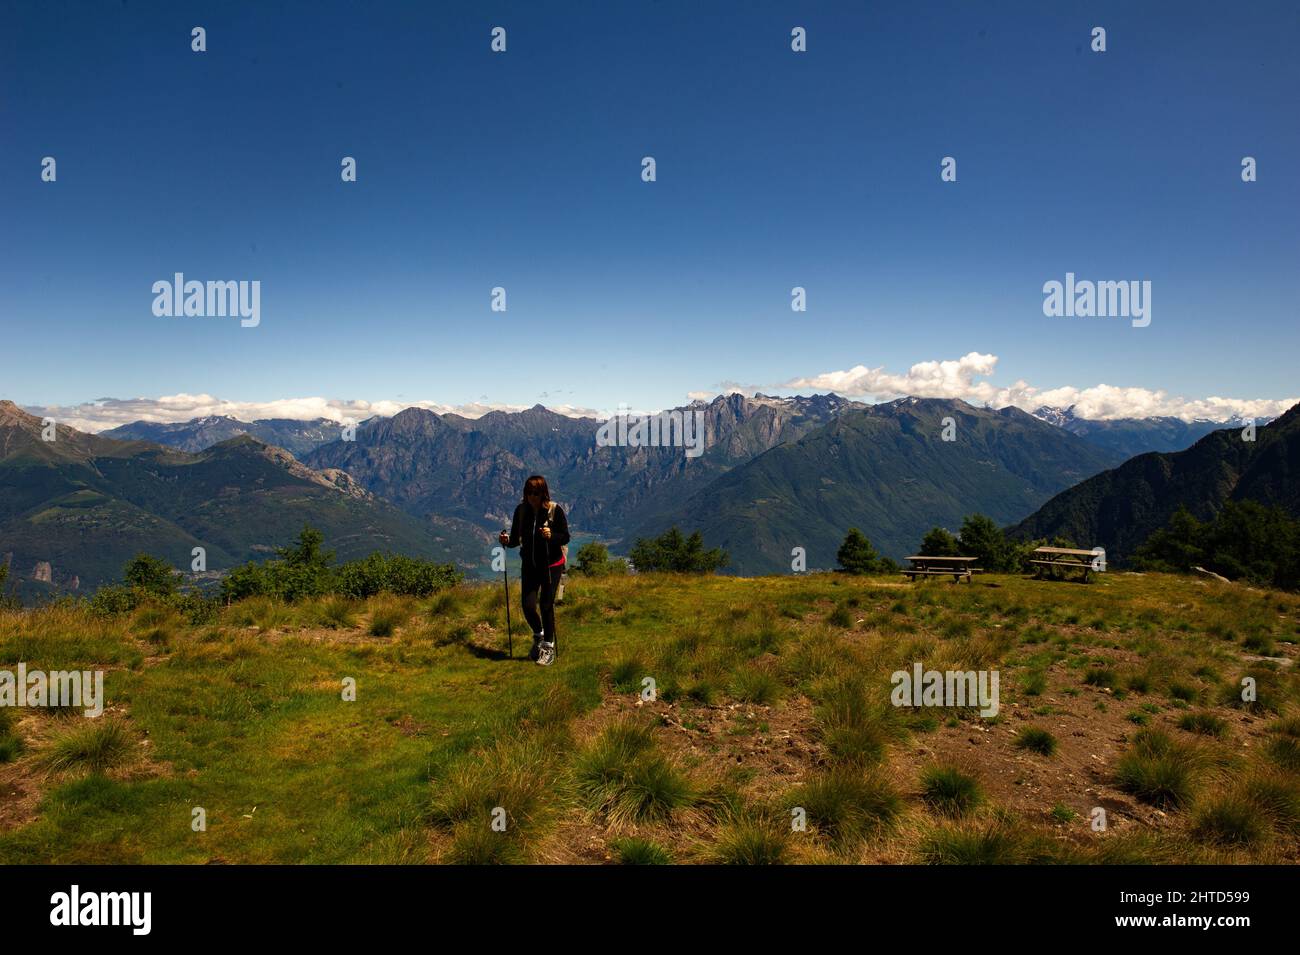 Europe, Italy, Lombardy, Lecco province, landscape from the top of Mount Legnoncino. Stock Photo